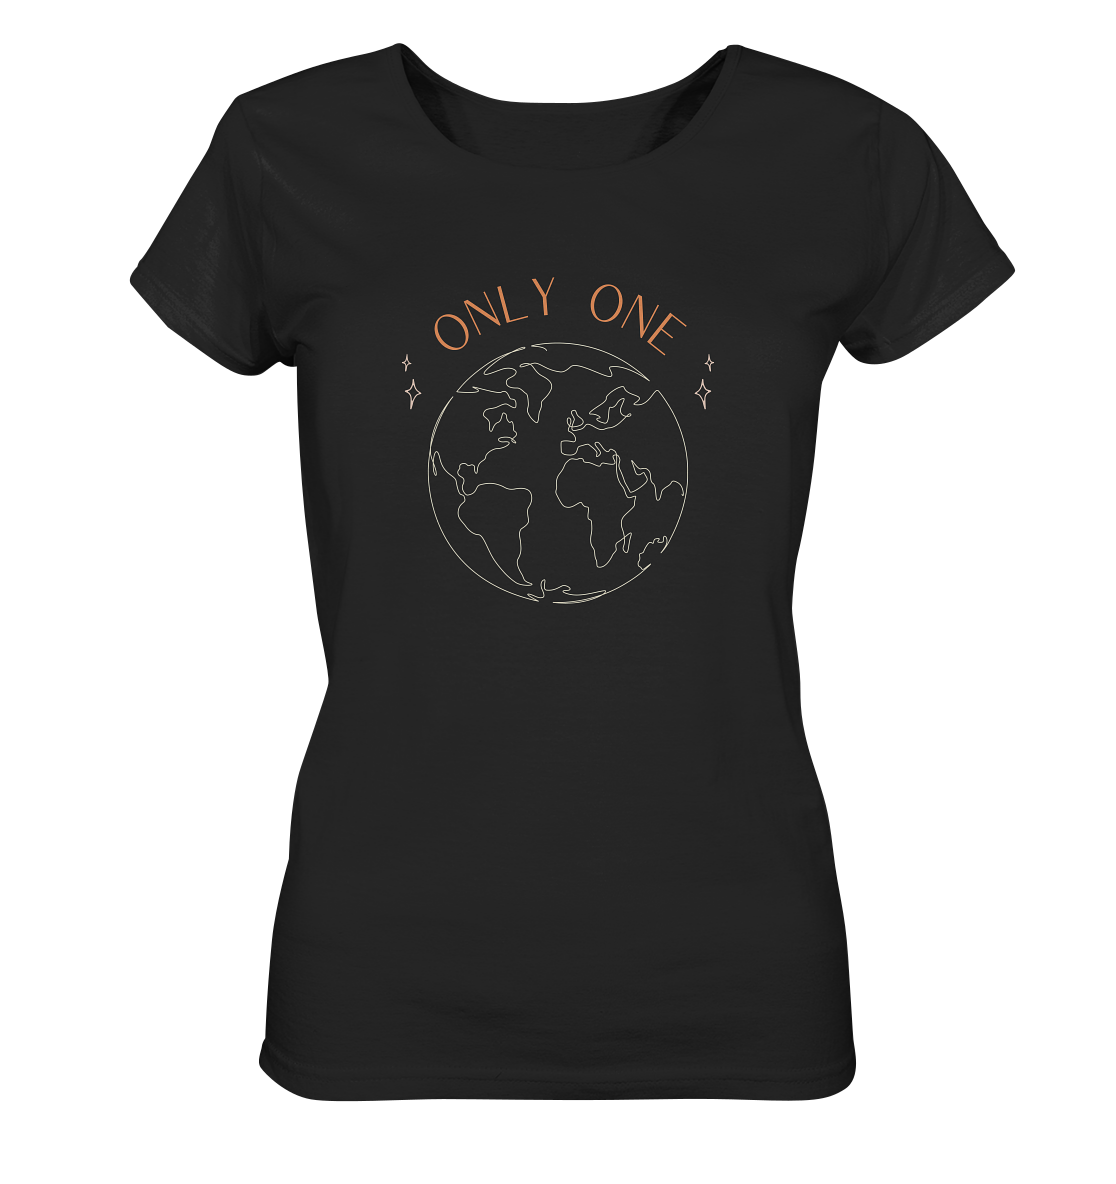 ladies organic scoop neck t-shirt saying only one earth in black color